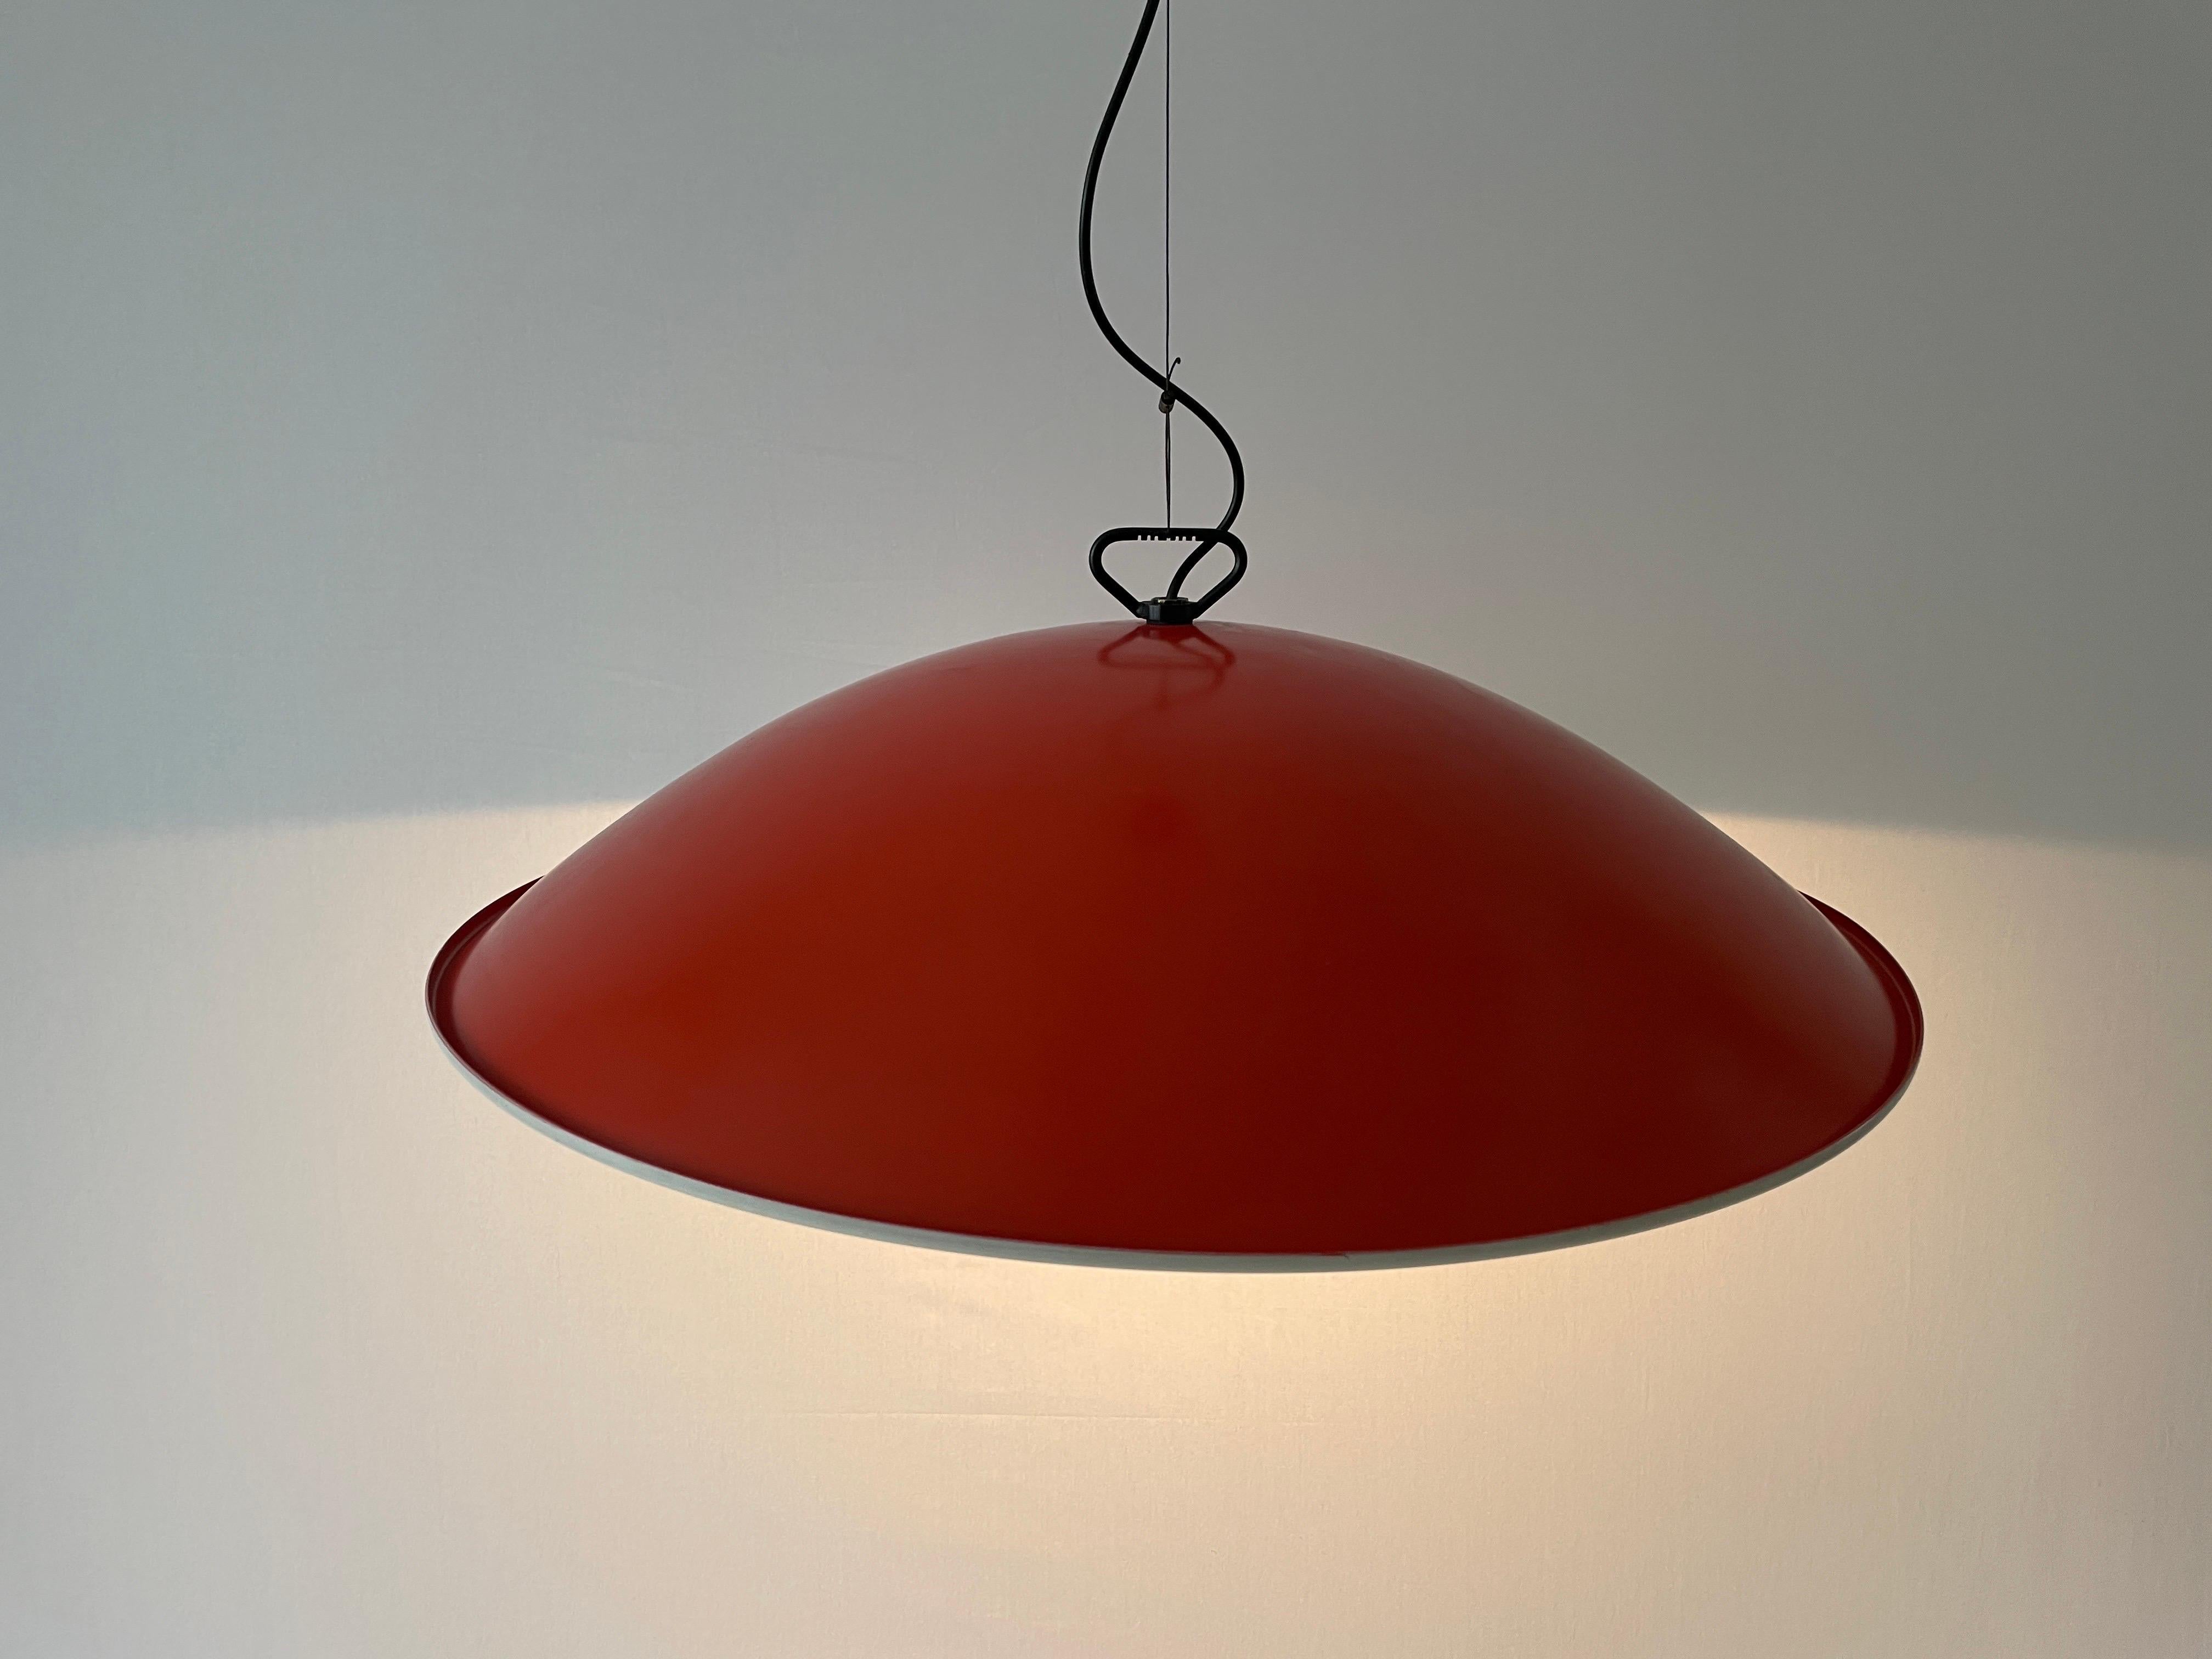 XXL Orange and White Metal Large Hotel Pendant Lamp, 1960s, Italy For Sale 6